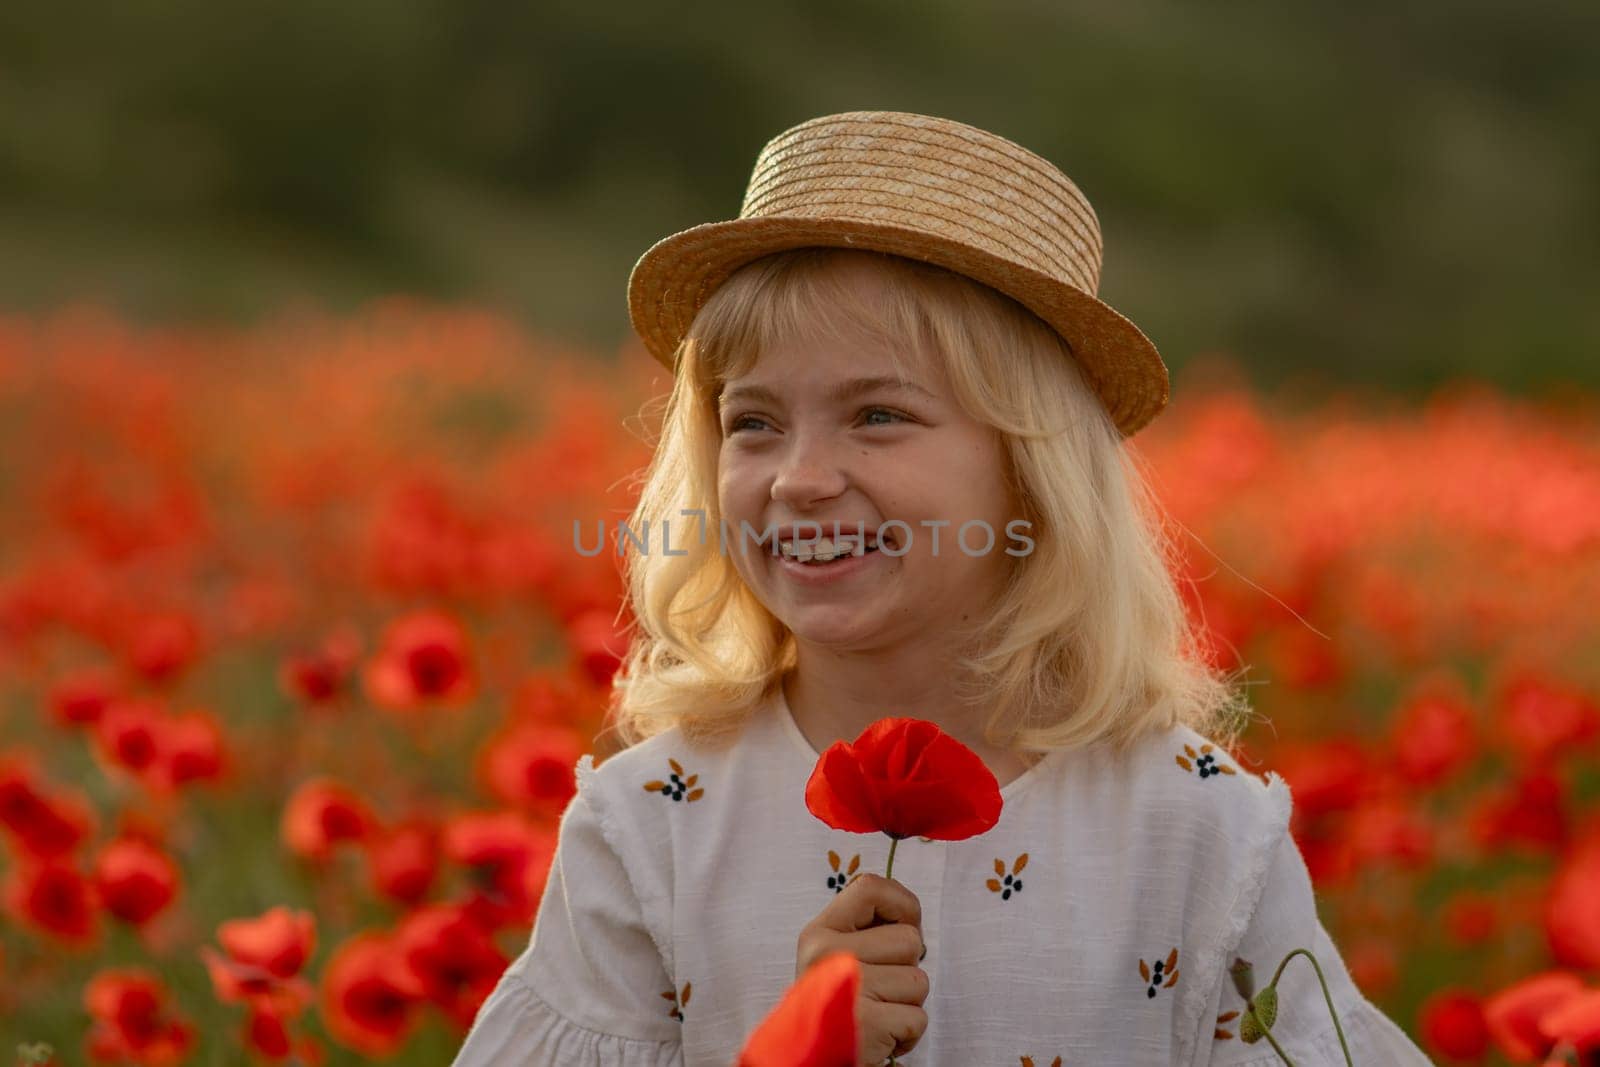 A young girl is standing in a field of red poppies, holding a red flower. She is smiling and she is enjoying the beautiful scenery